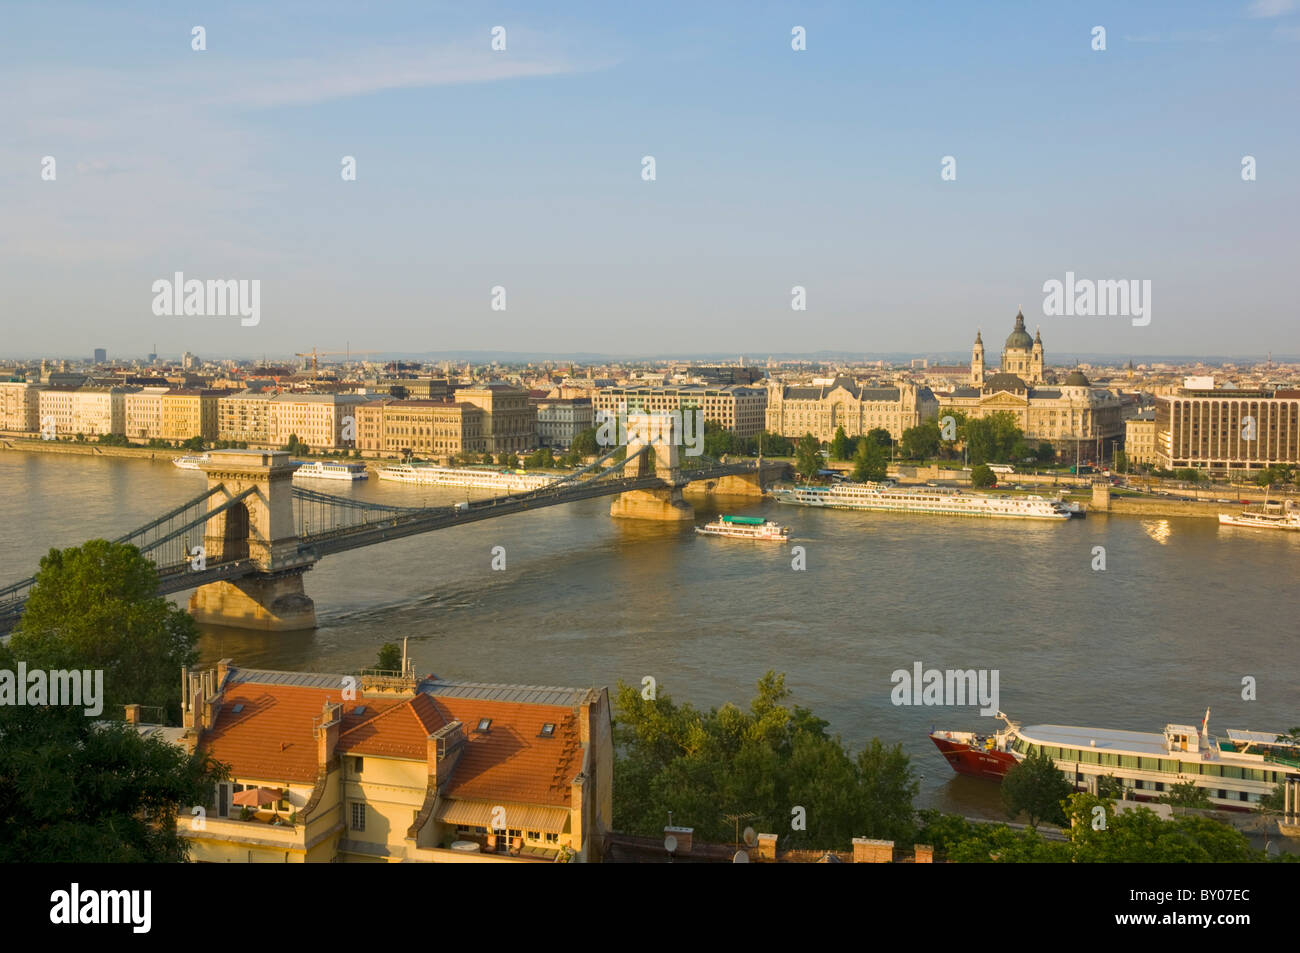 The 'chain bridge' Szechenyi Lanchid over the river Danube in the foreground, Budapest, Hungary, Europe, EU Stock Photo